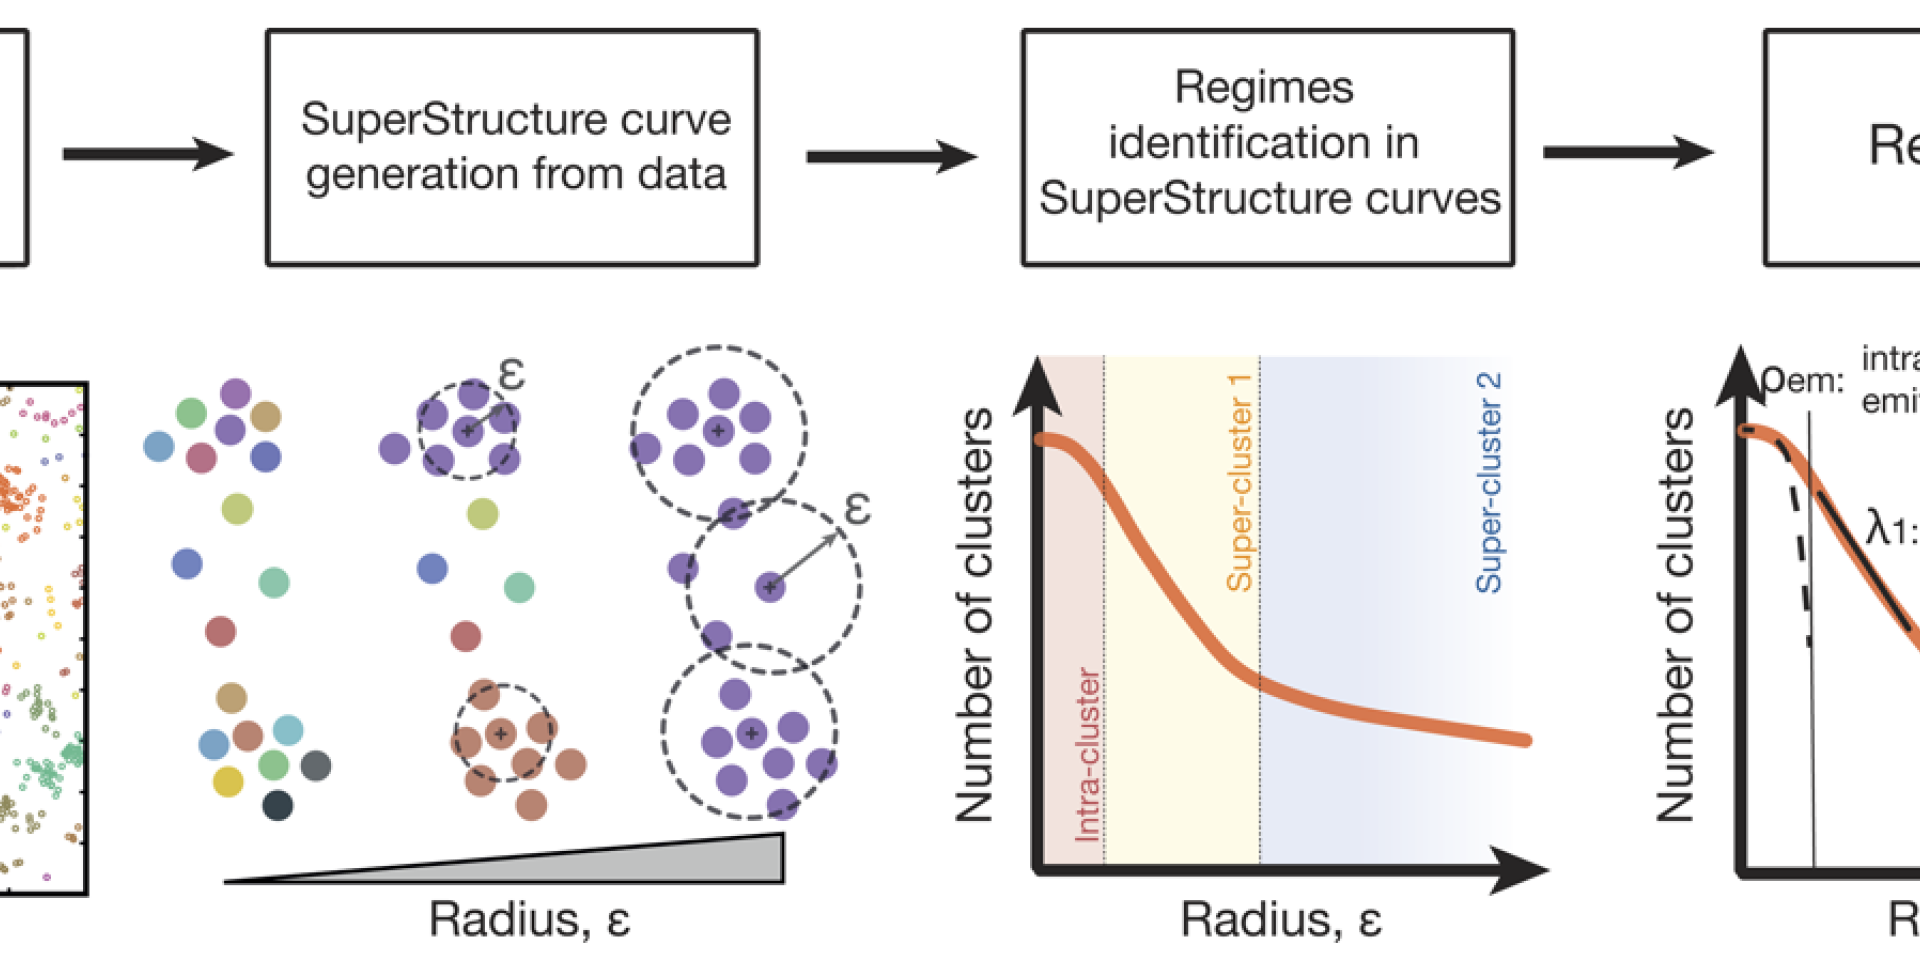 Working principle of SuperStructure analysis [for details see Marenda et al. J Cell Biol. 2021 May 3;220(5):e202010003].